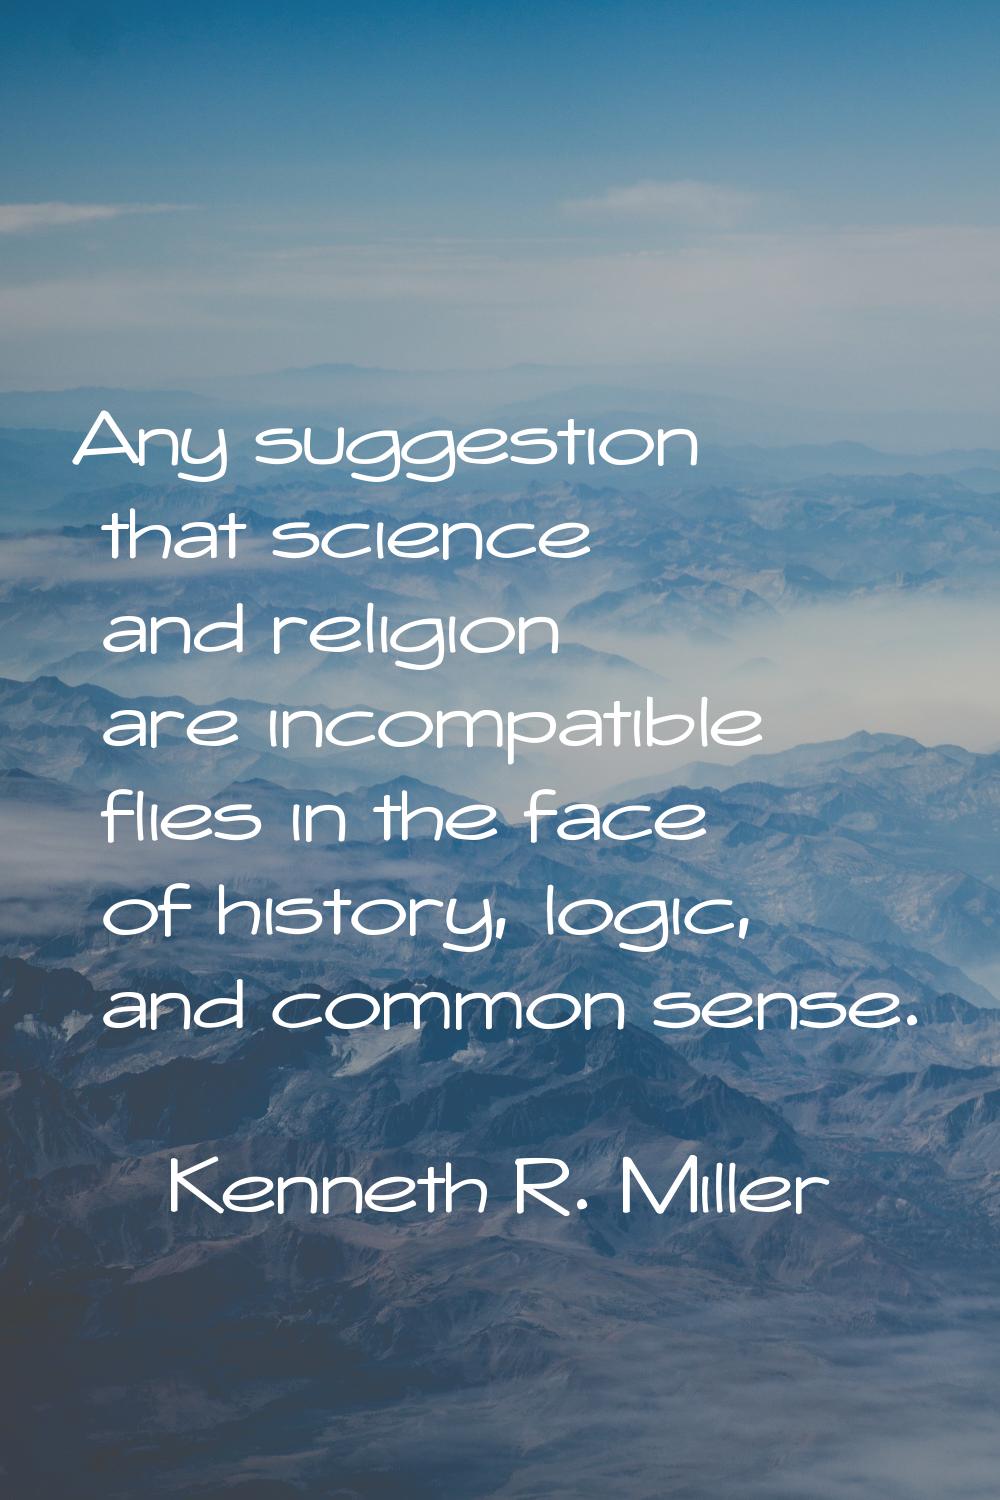 Any suggestion that science and religion are incompatible flies in the face of history, logic, and 